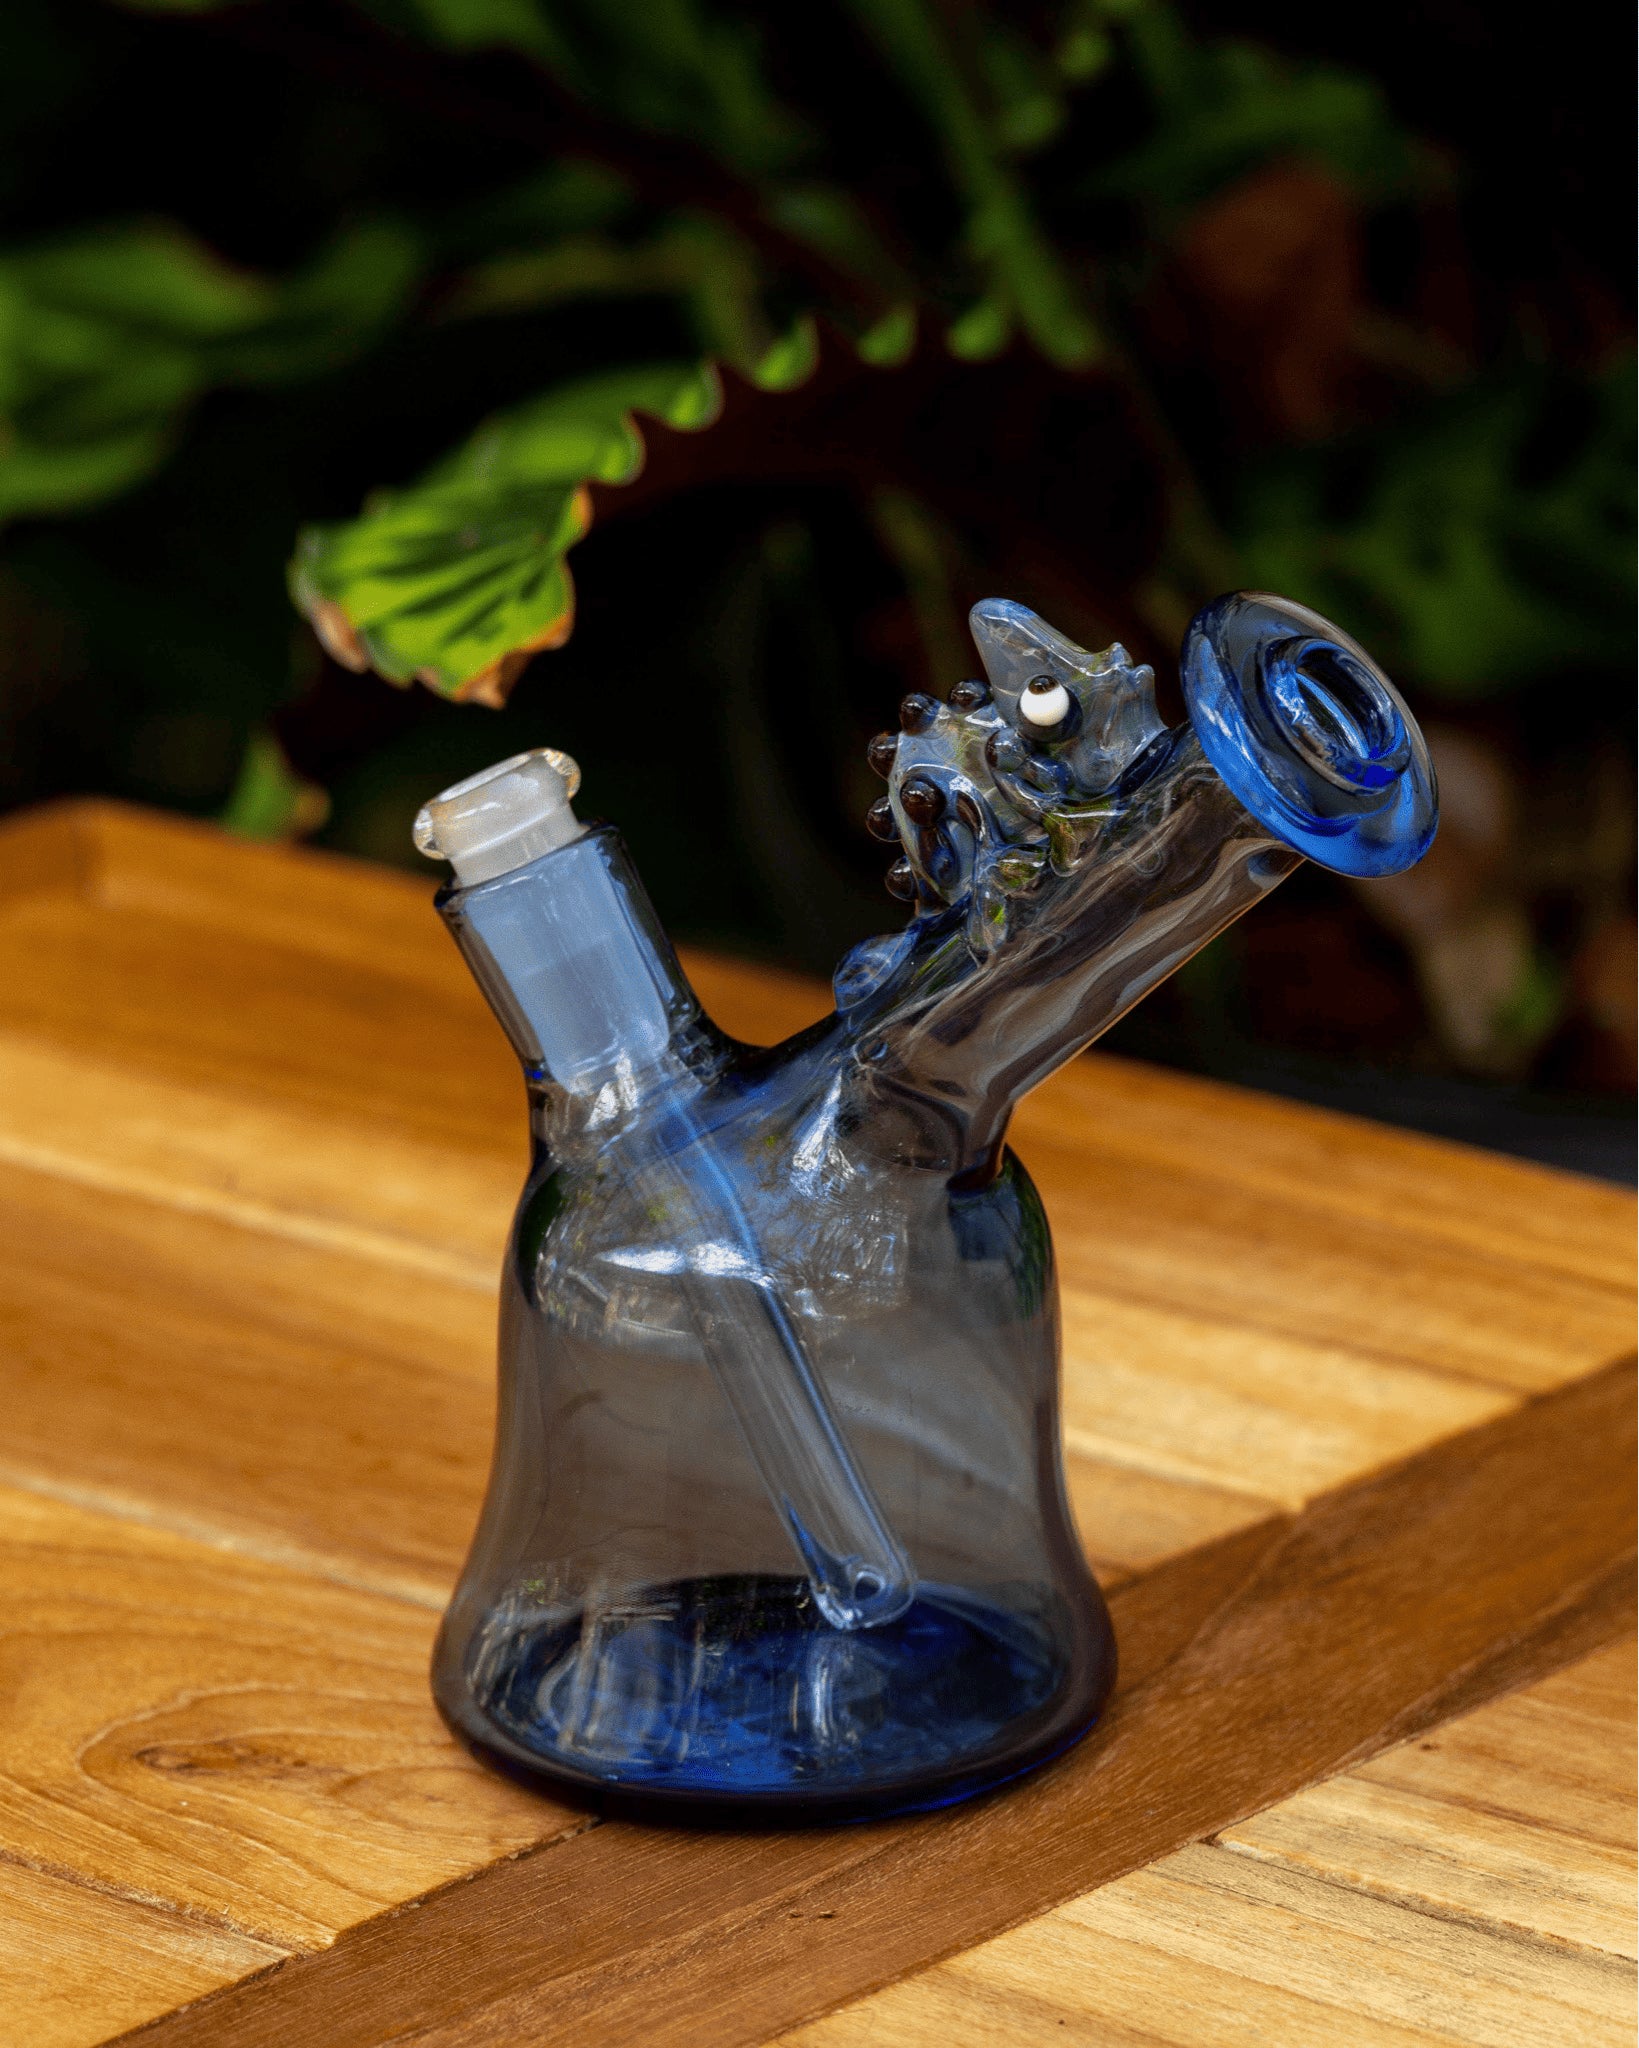 meticulously crafted design of the Blue Color Rig w/ Chameleon (A) by Willy That Glass Guy